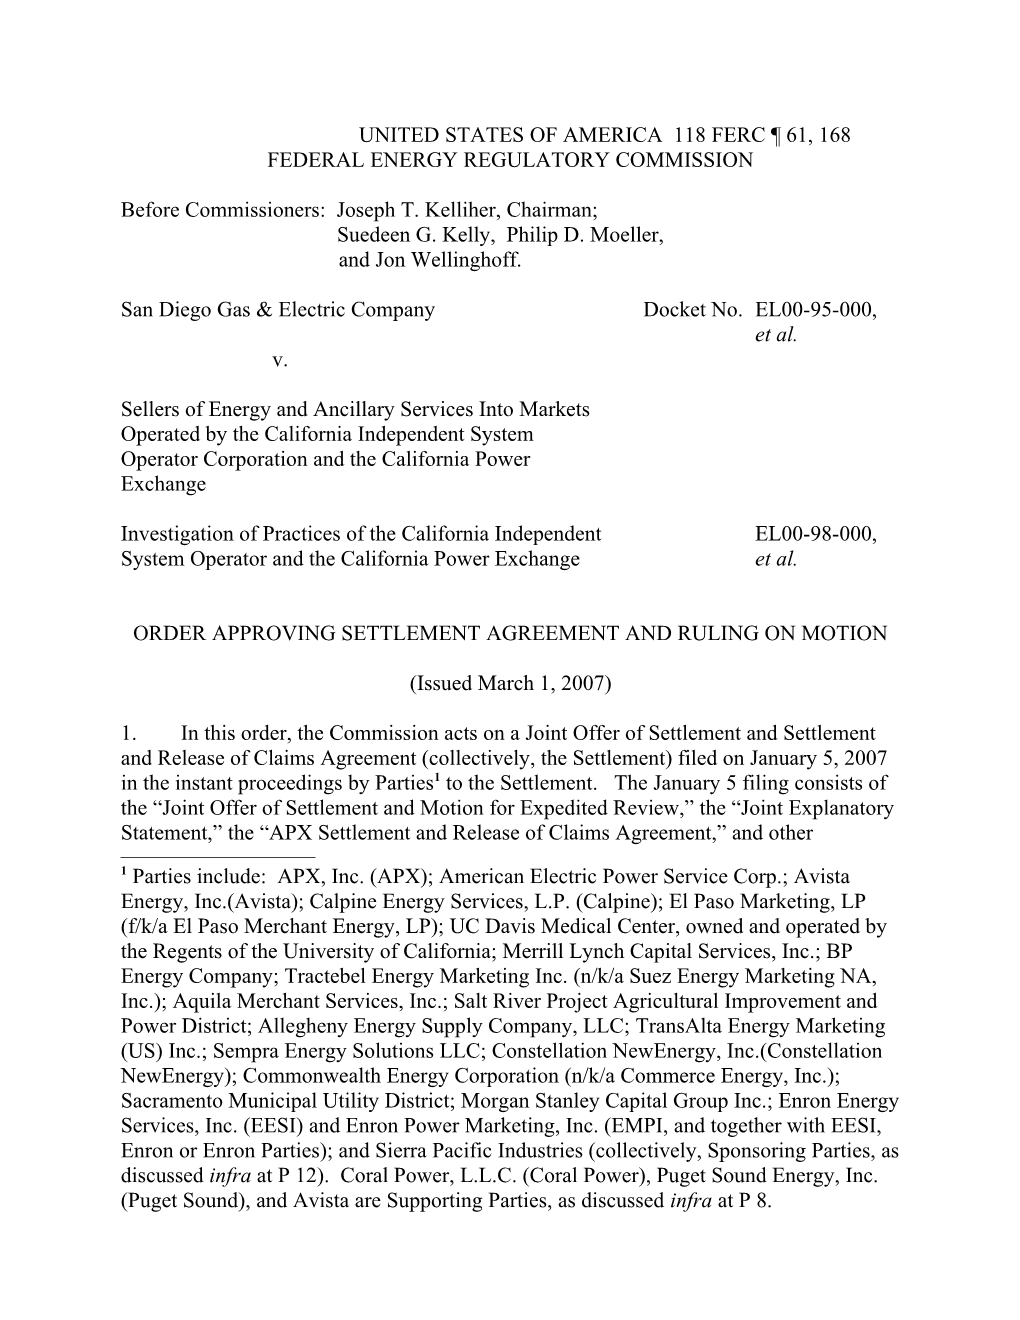 March 1, 2007 Order Approving Settlement Agreement and Ruling Motion in Docket No. EL00-95-045